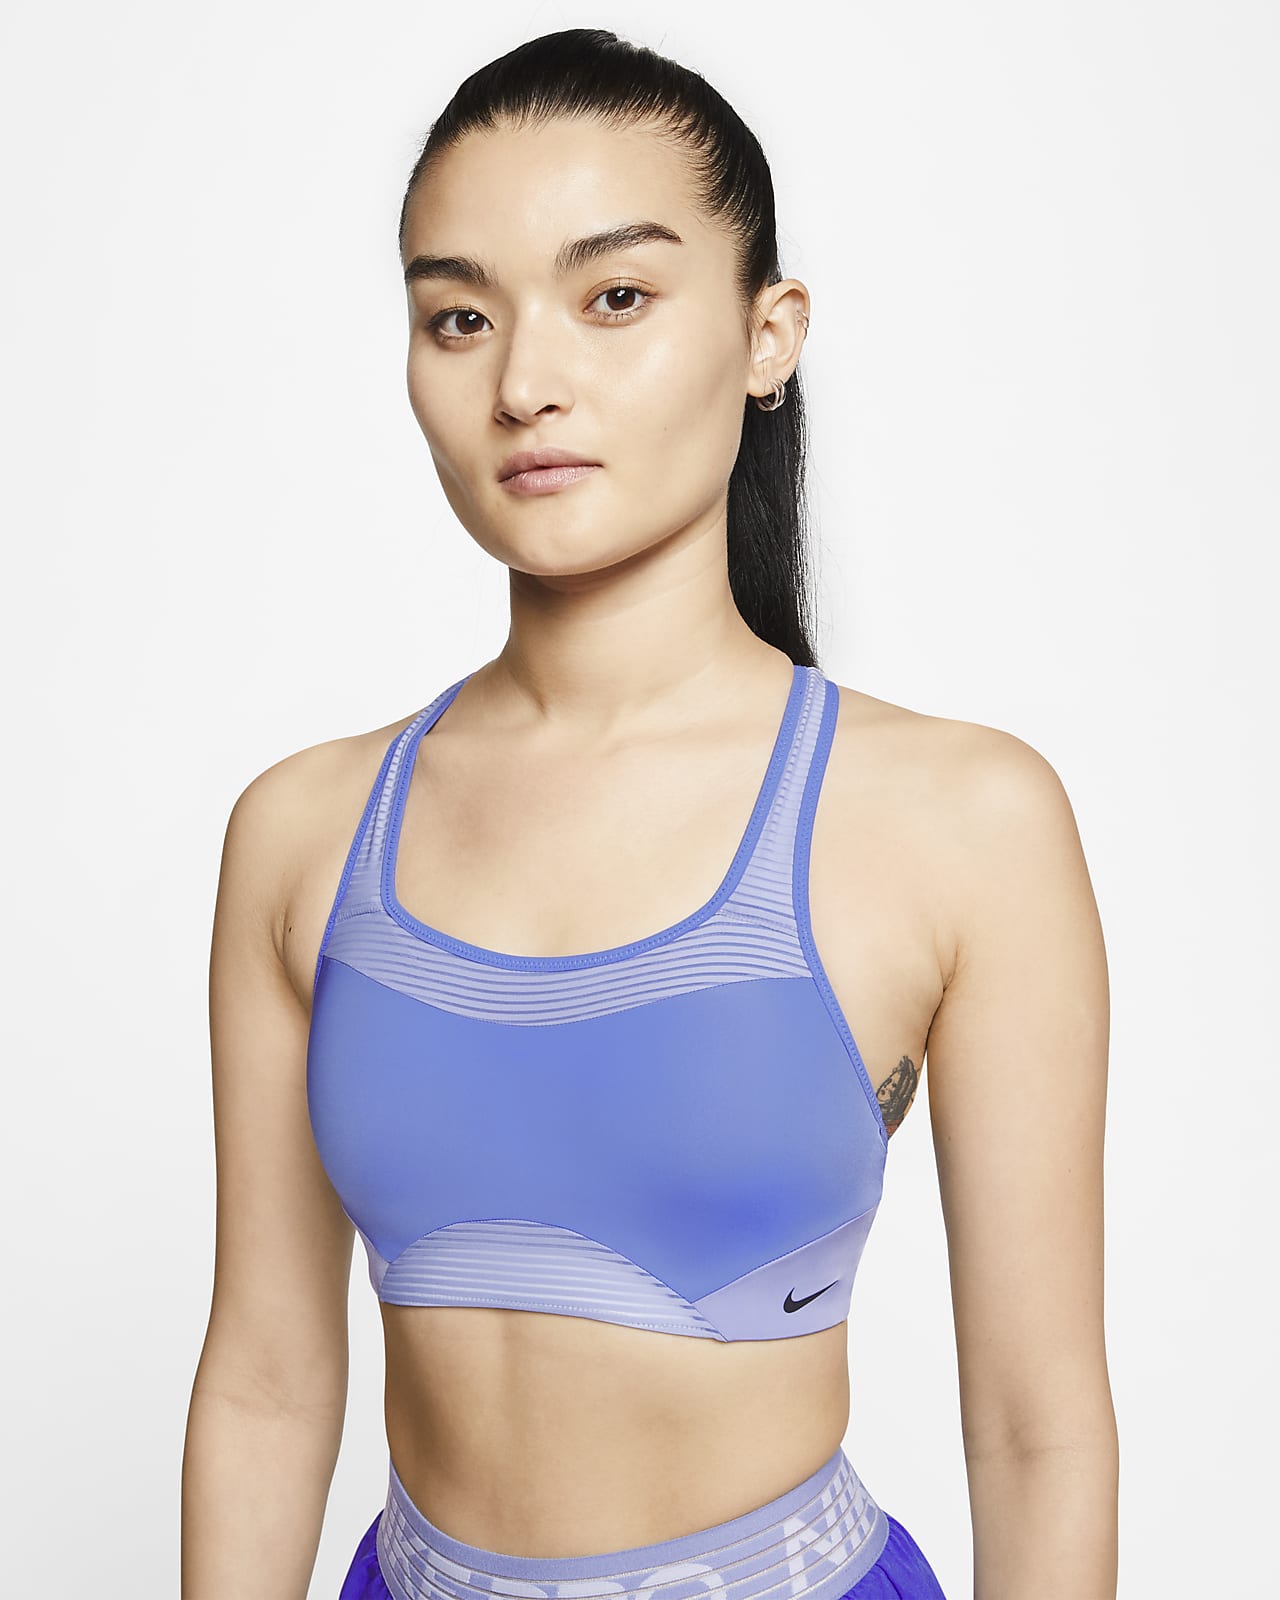 https://static.nike.com/a/images/t_PDP_1280_v1/f_auto,q_auto:eco/i1-7fa6478f-d08e-435a-9e51-bd185ef378c5/alpha-womens-high-support-padded-striped-sports-bra-N1hJHw.png